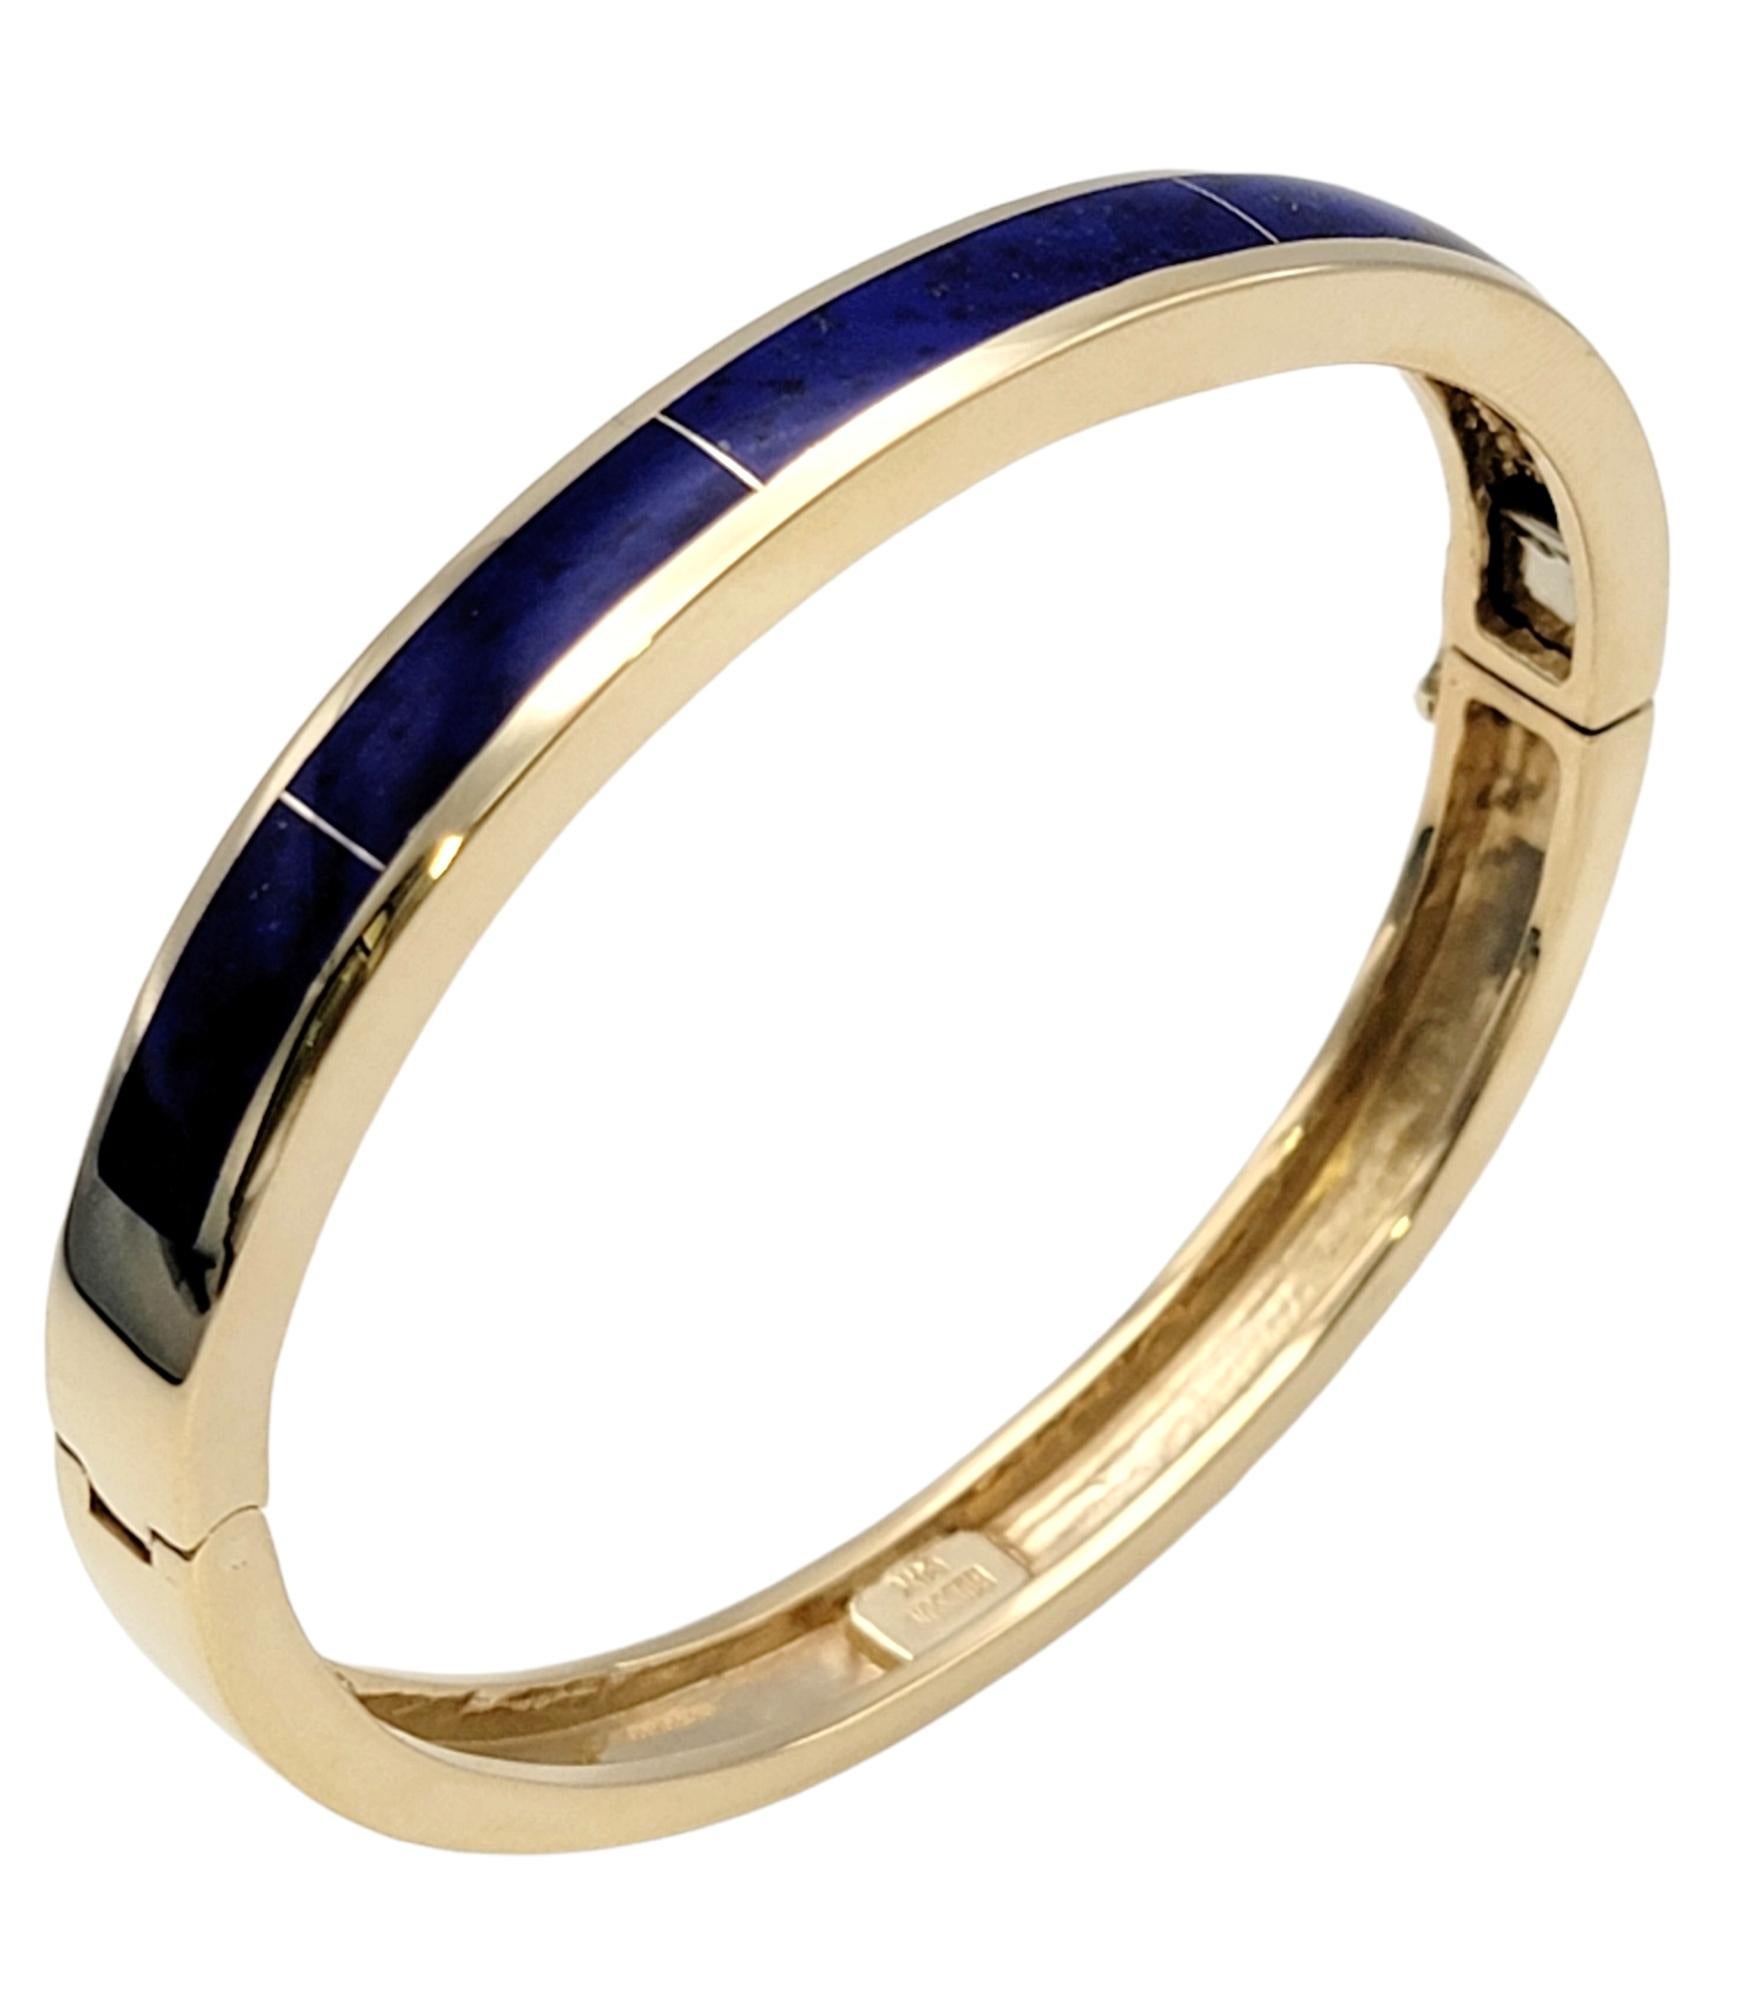 Contemporary bangle bracelet set with stunning blue lapis lazuli. The incredible, deep blue color of the natural stone really pops against the warm yellow gold setting and adds a perfect pop of color to your look. 

Metal: 14K Yellow Gold
Natural